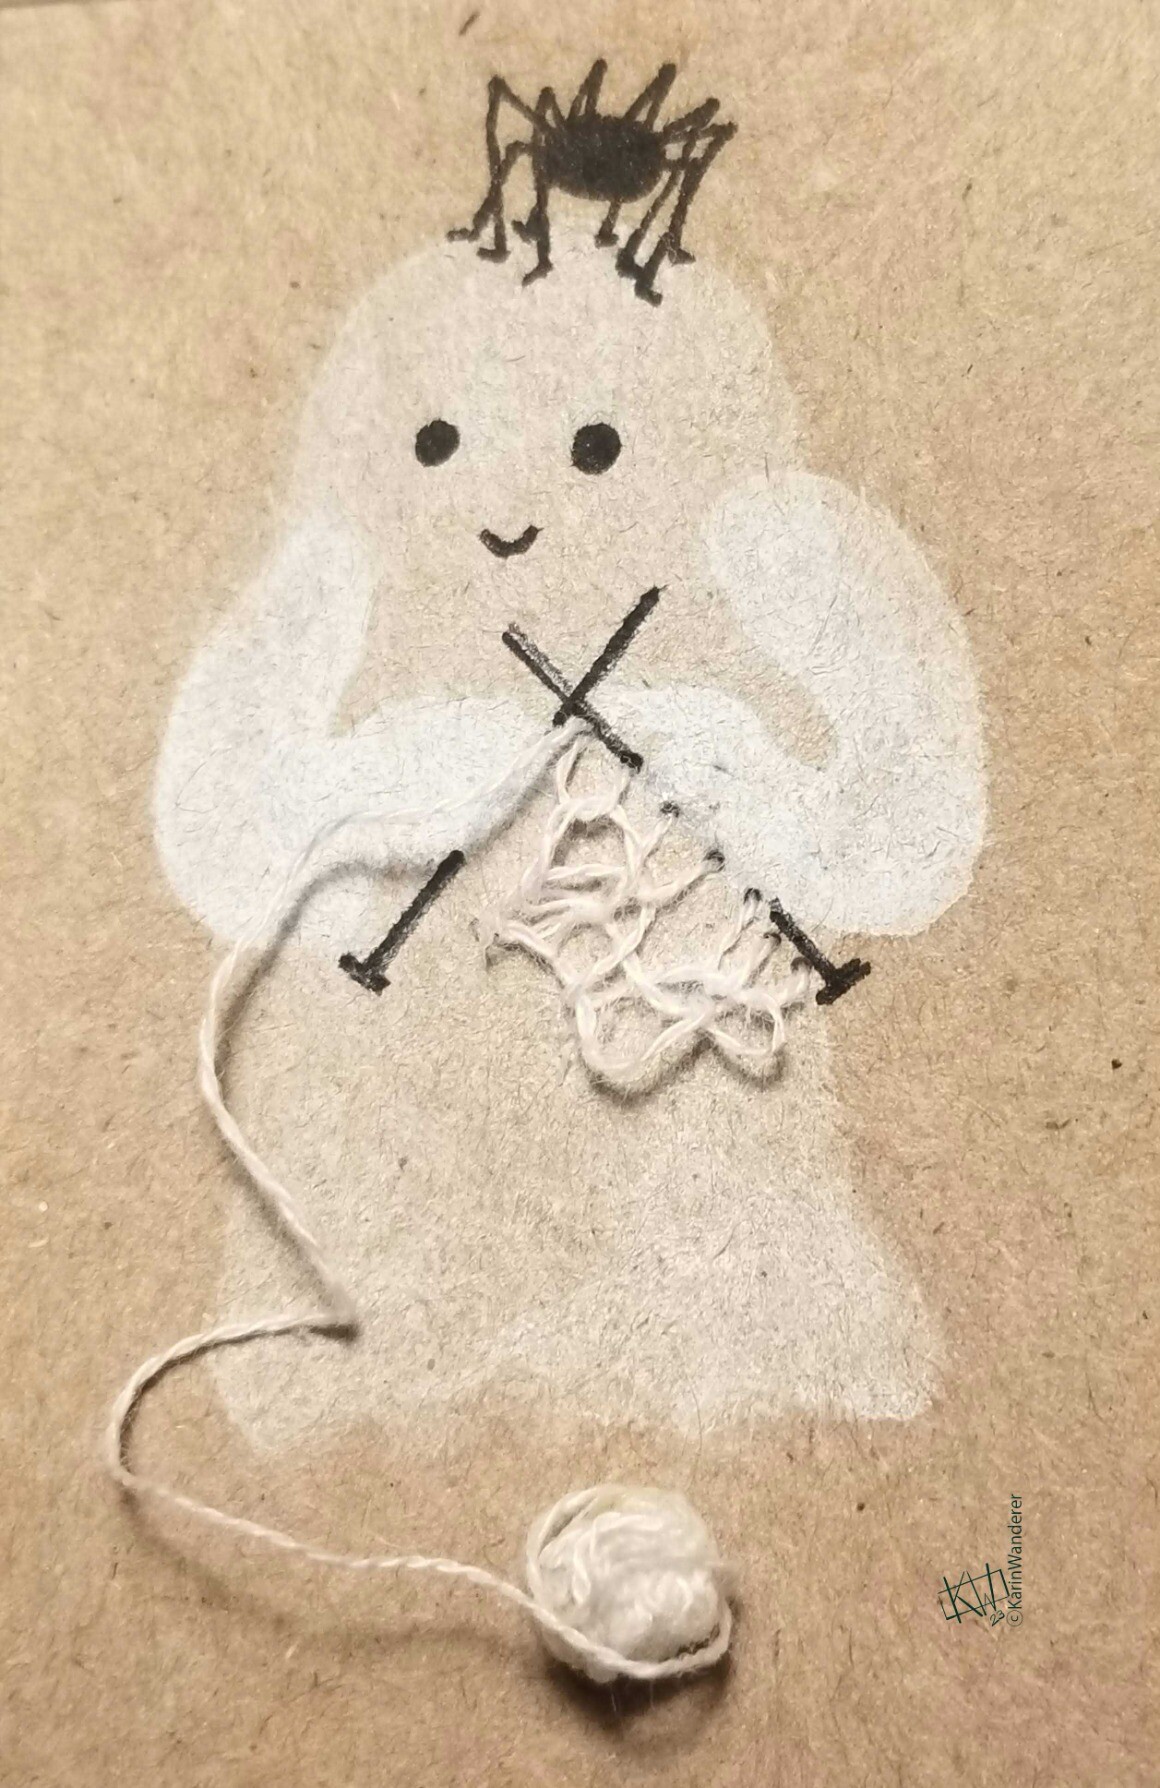 Watercolor & ink on cardboard. A smiling ghost knits a web for the spider sitting on her head, waiting patiently. The knitting is embroidery thread stitched through the cardboard and the thread ball sits at the ghost's feet.